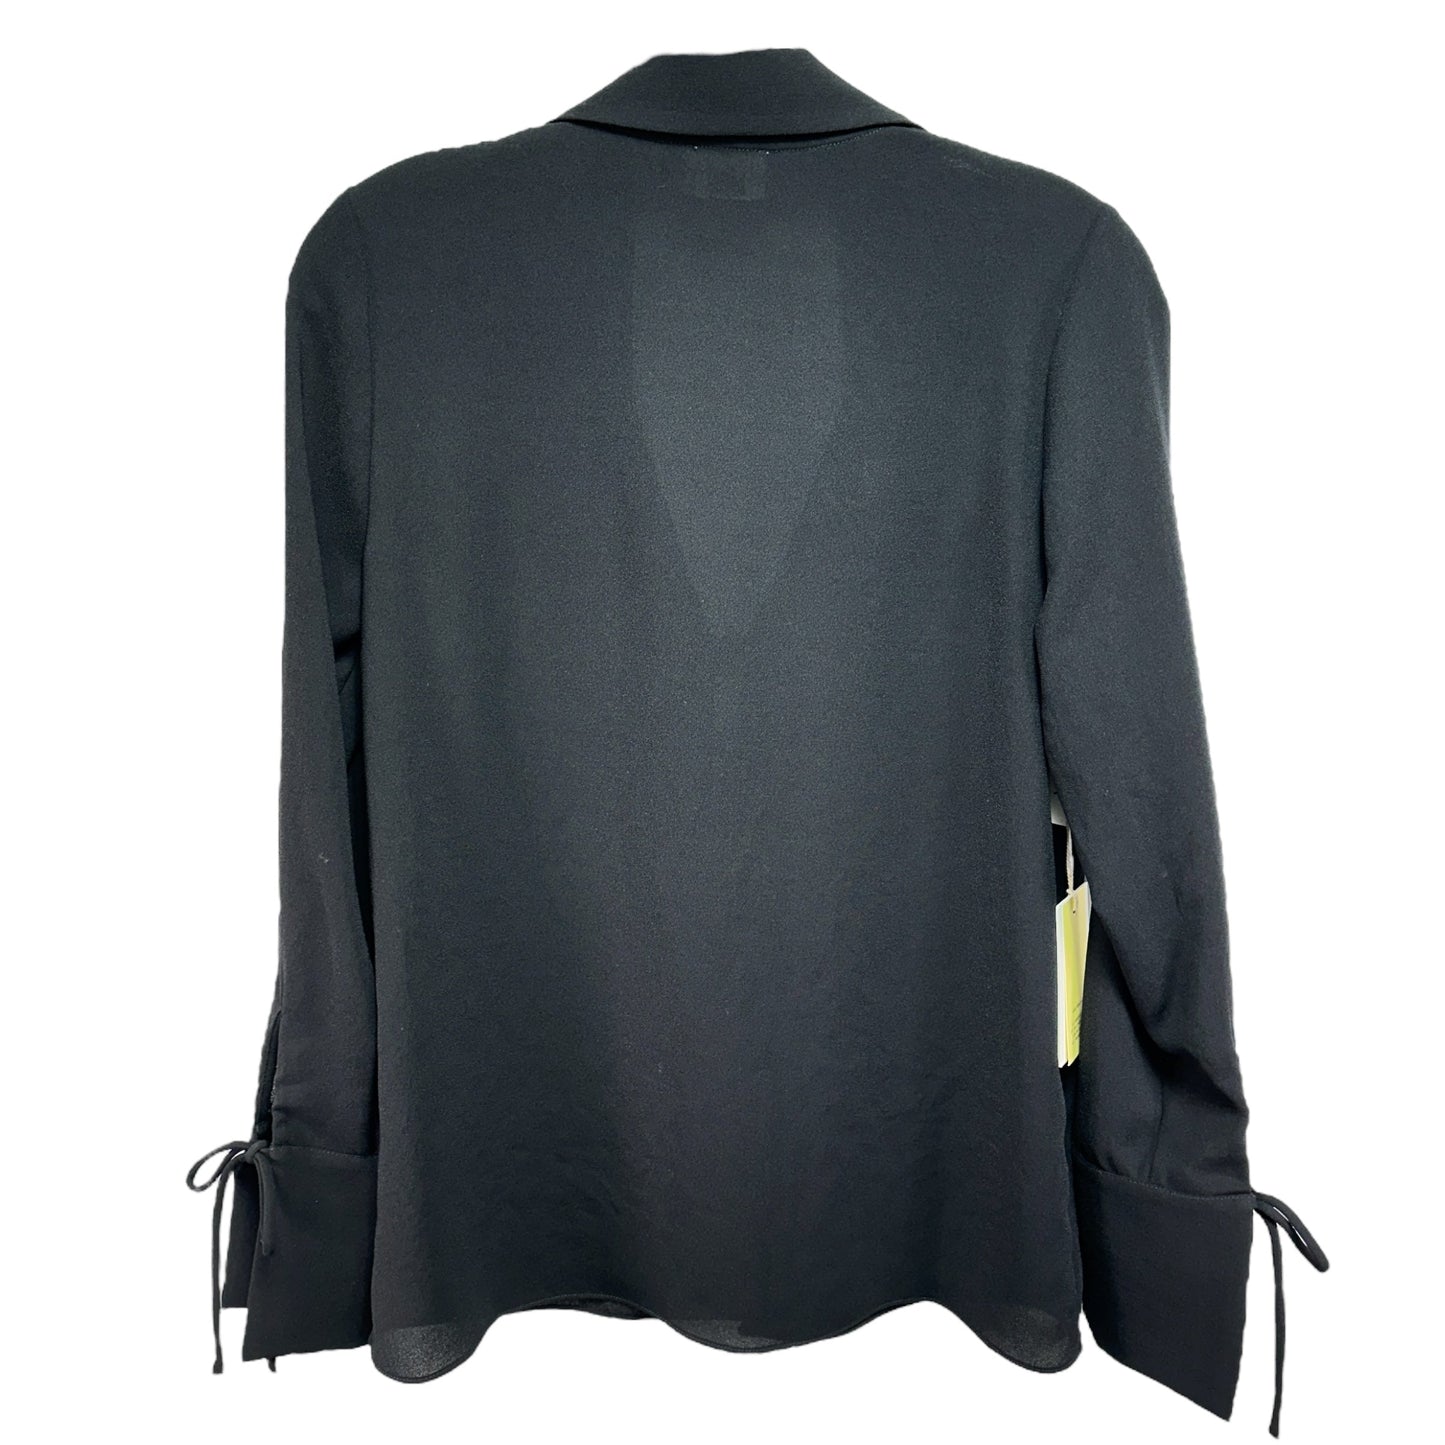 Favor Blouse in Black Wilfred, Size S